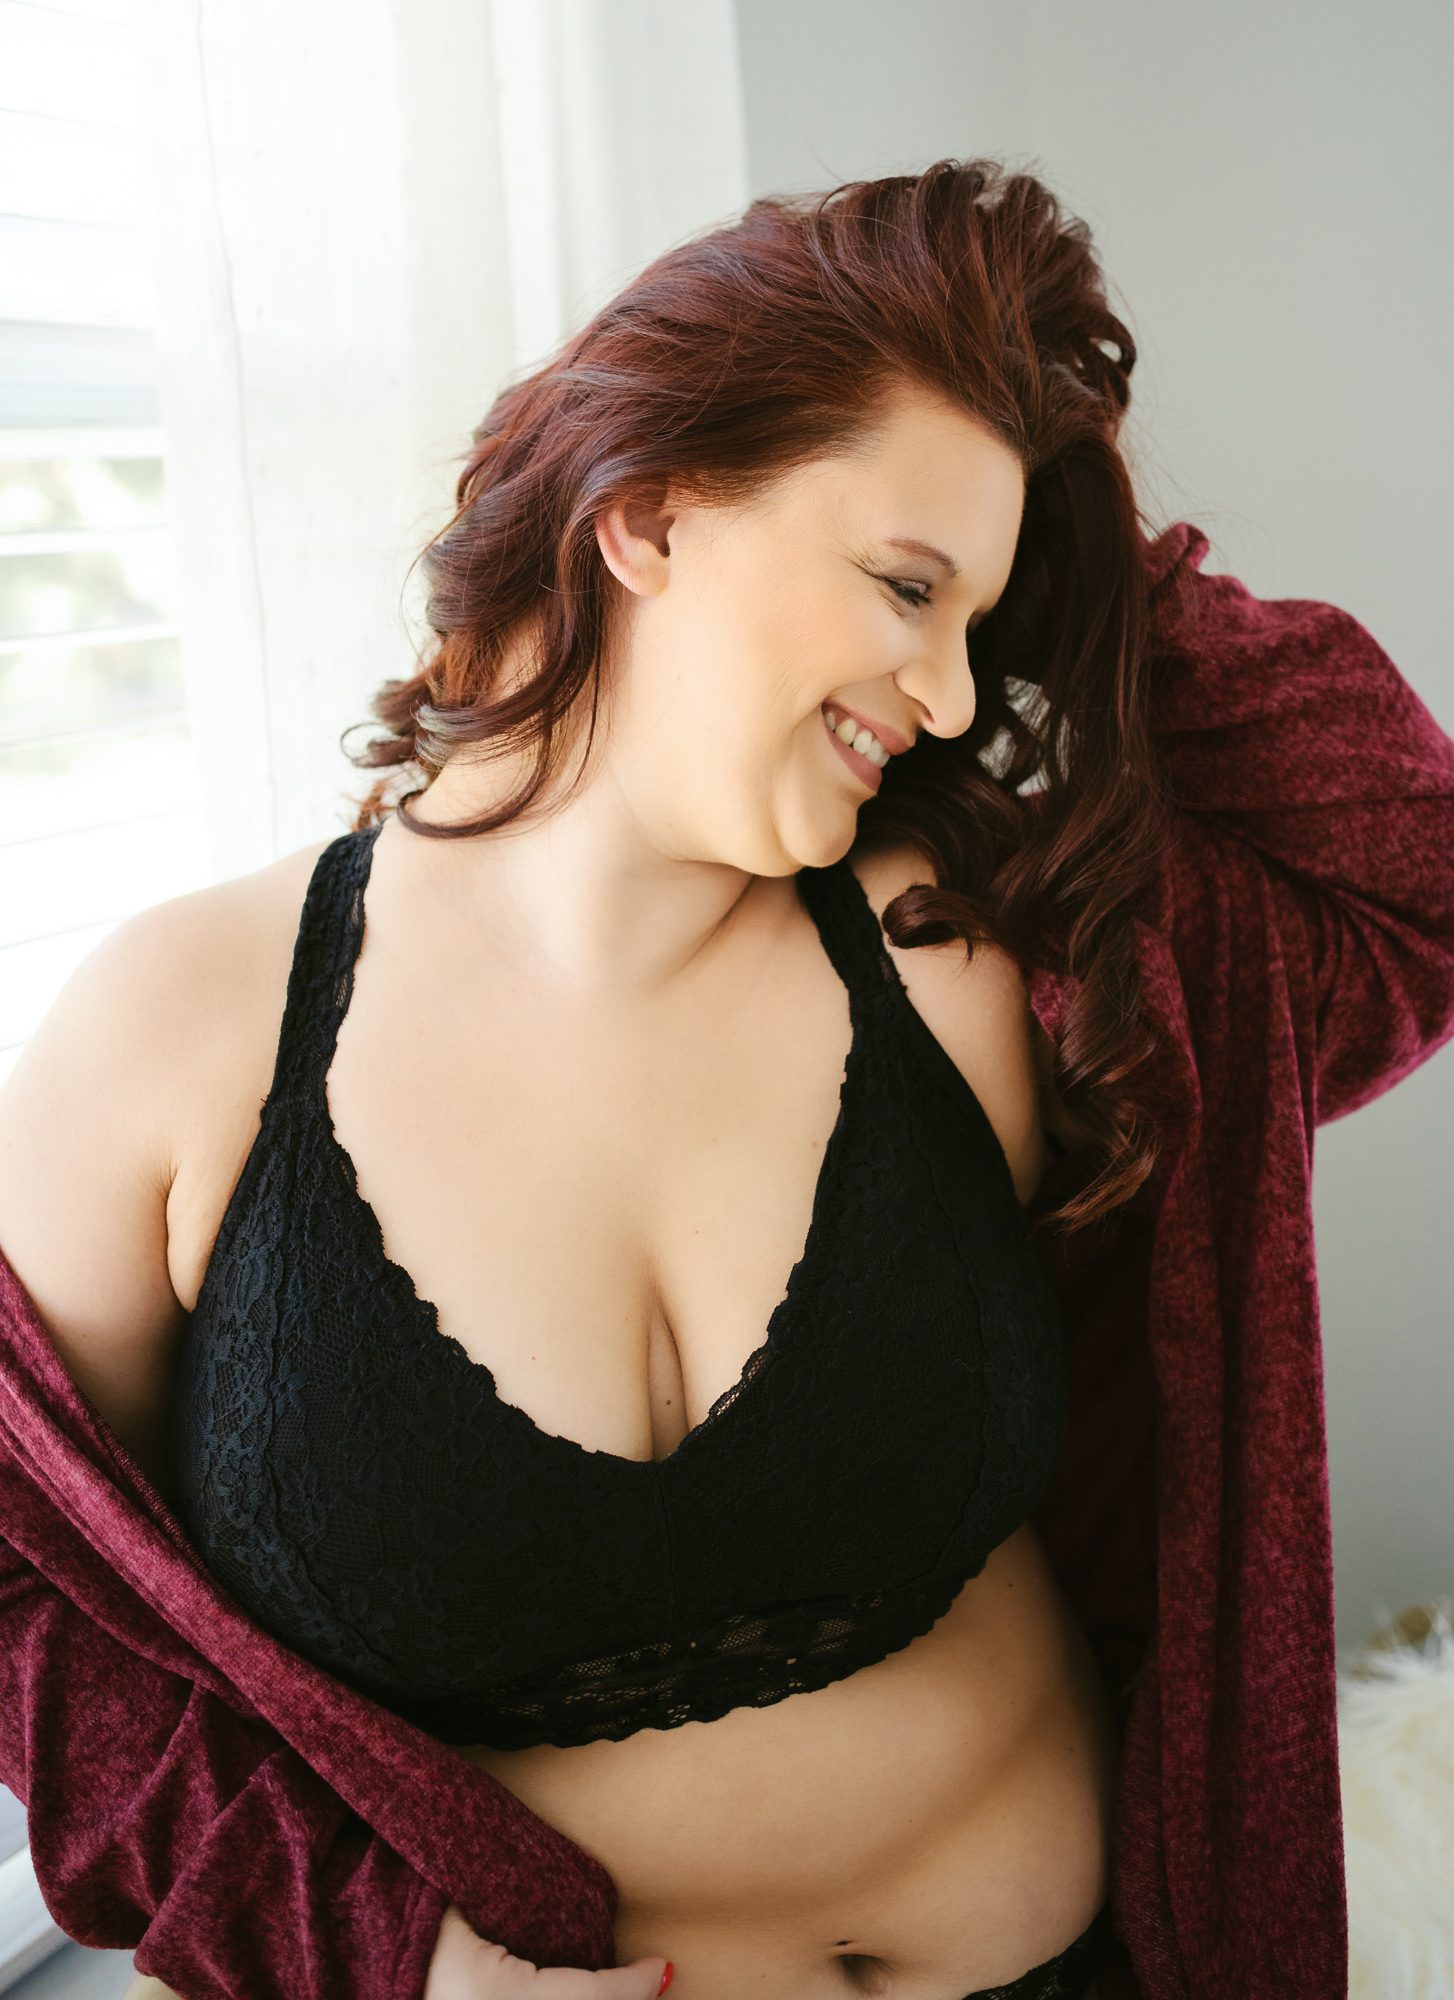 woman in black lingerie top smiling